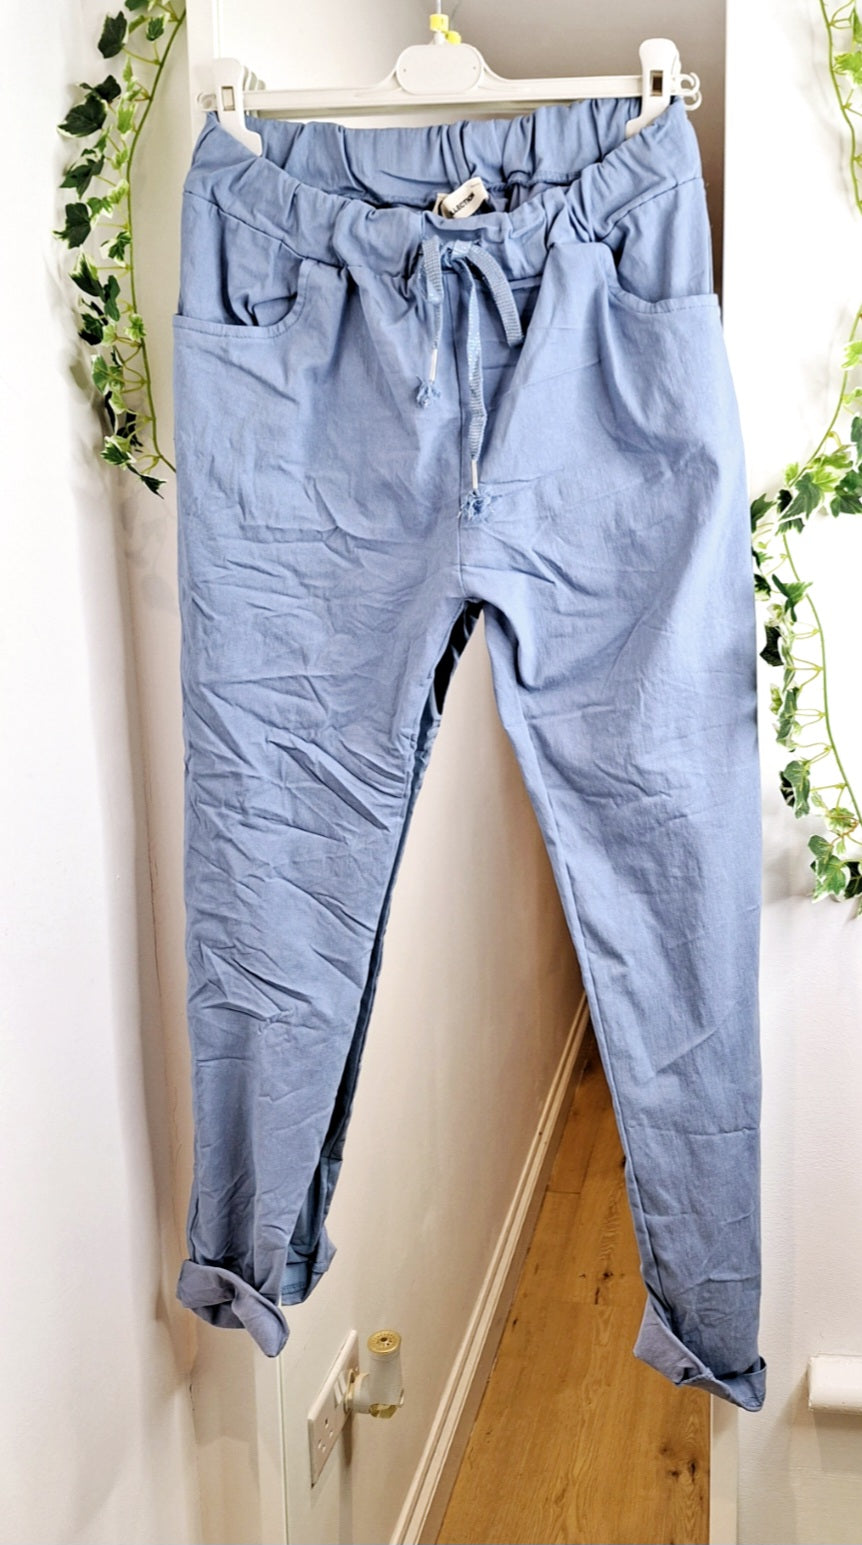 New Triple Star Soft Knit White and Blue Magic Trousers